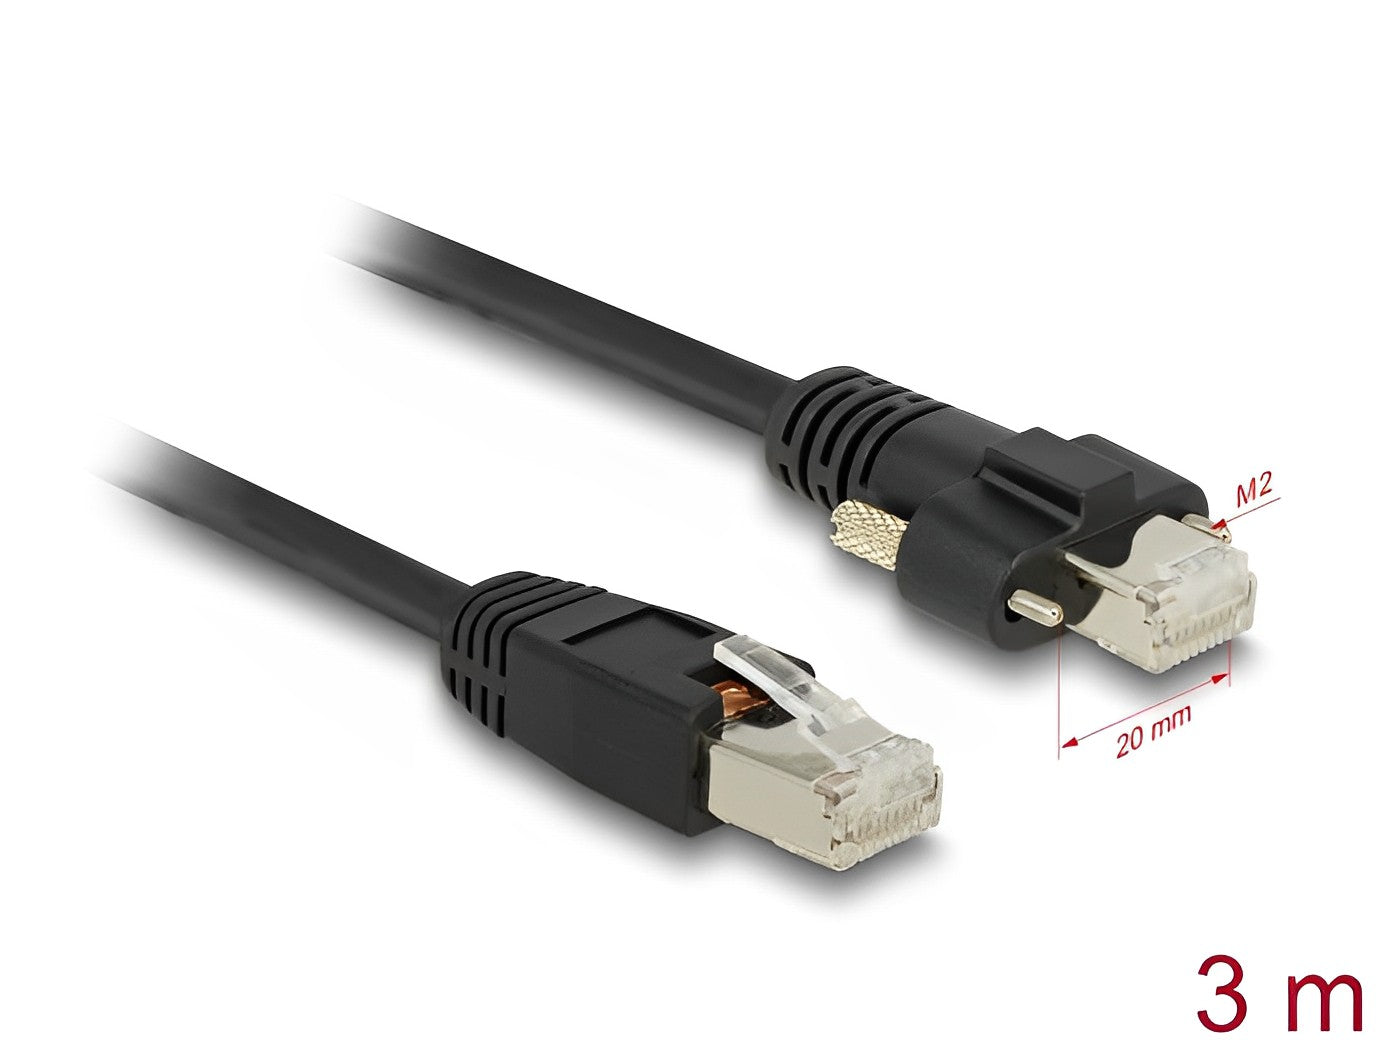 Delock Cable RJ45 plug to RJ45 plug with screw distance 20 mm for GigE Camera Cat.6A S/FTP 3 m black - delock.israel